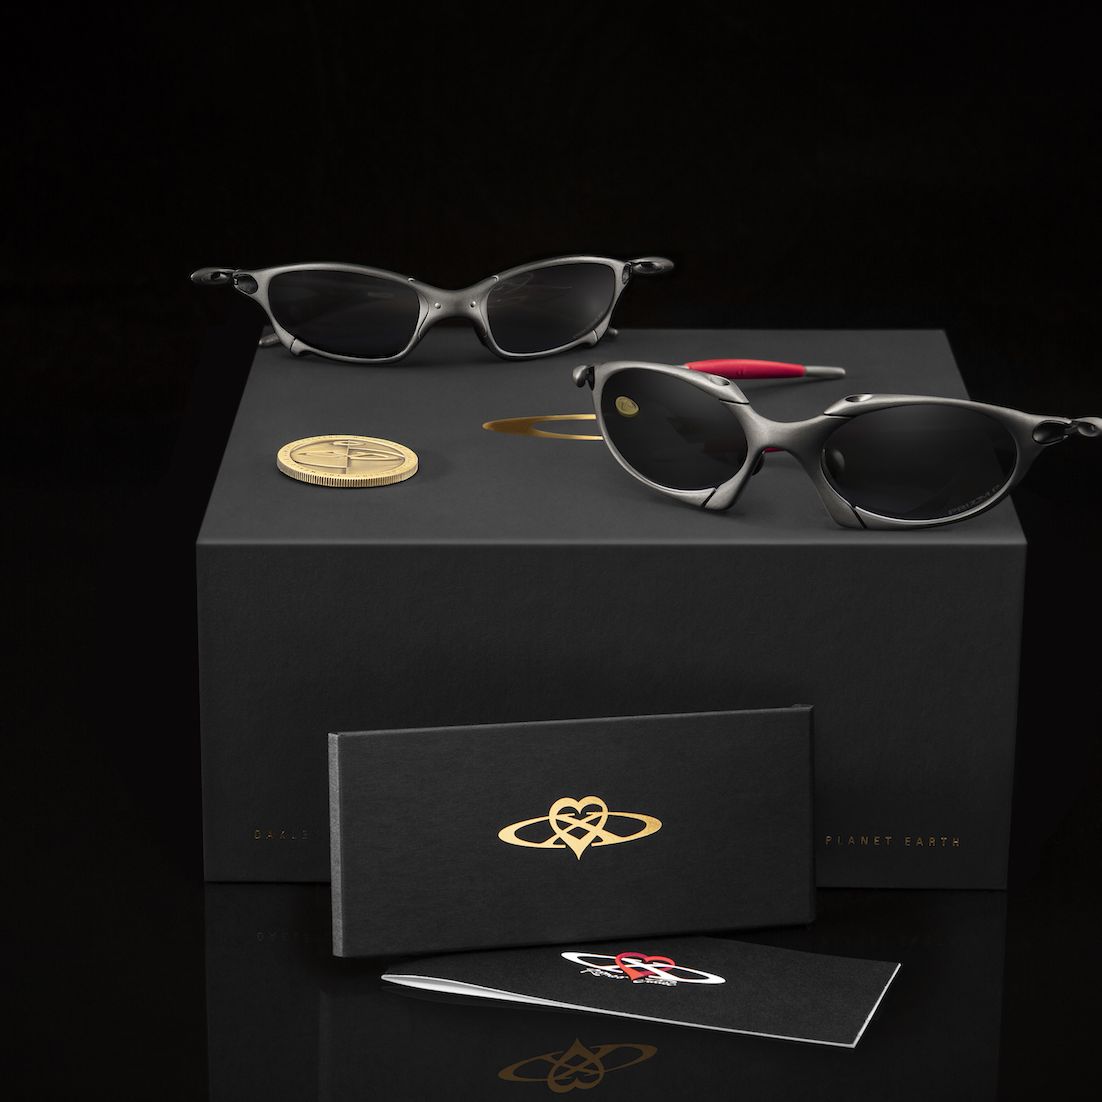 Why Did Oakley Create a Set of $14,000 Sunglasses?